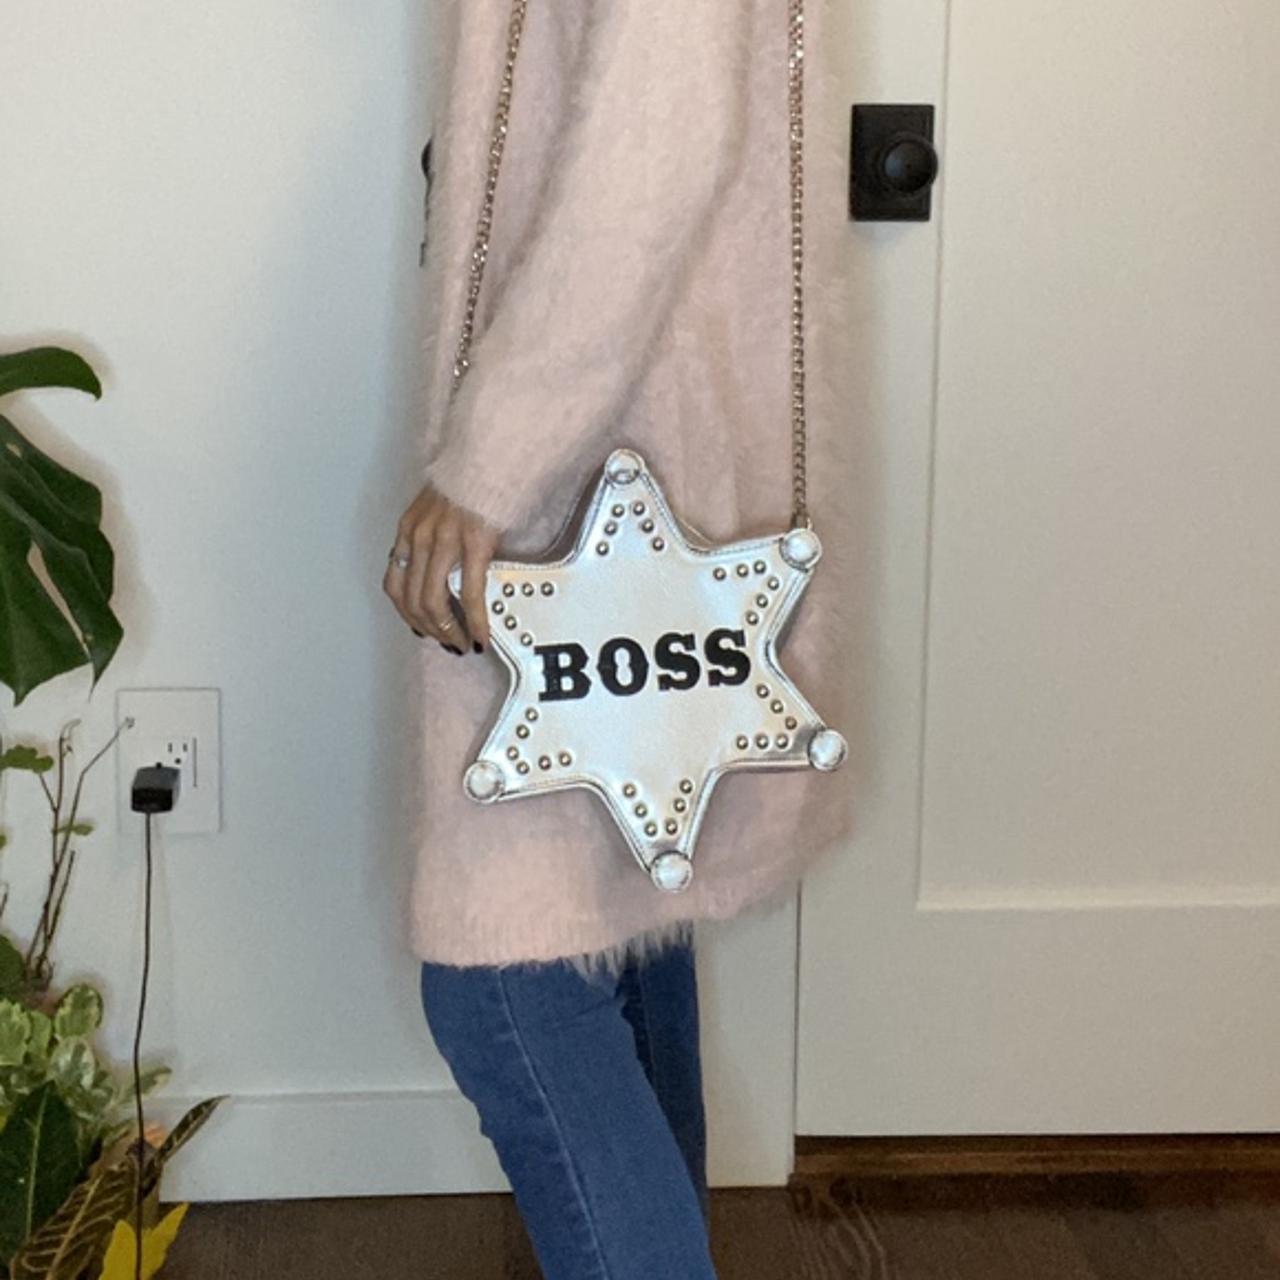 Product Image 4 - UNAVAILABLE

BO$$ BABE
I absolutely adore this